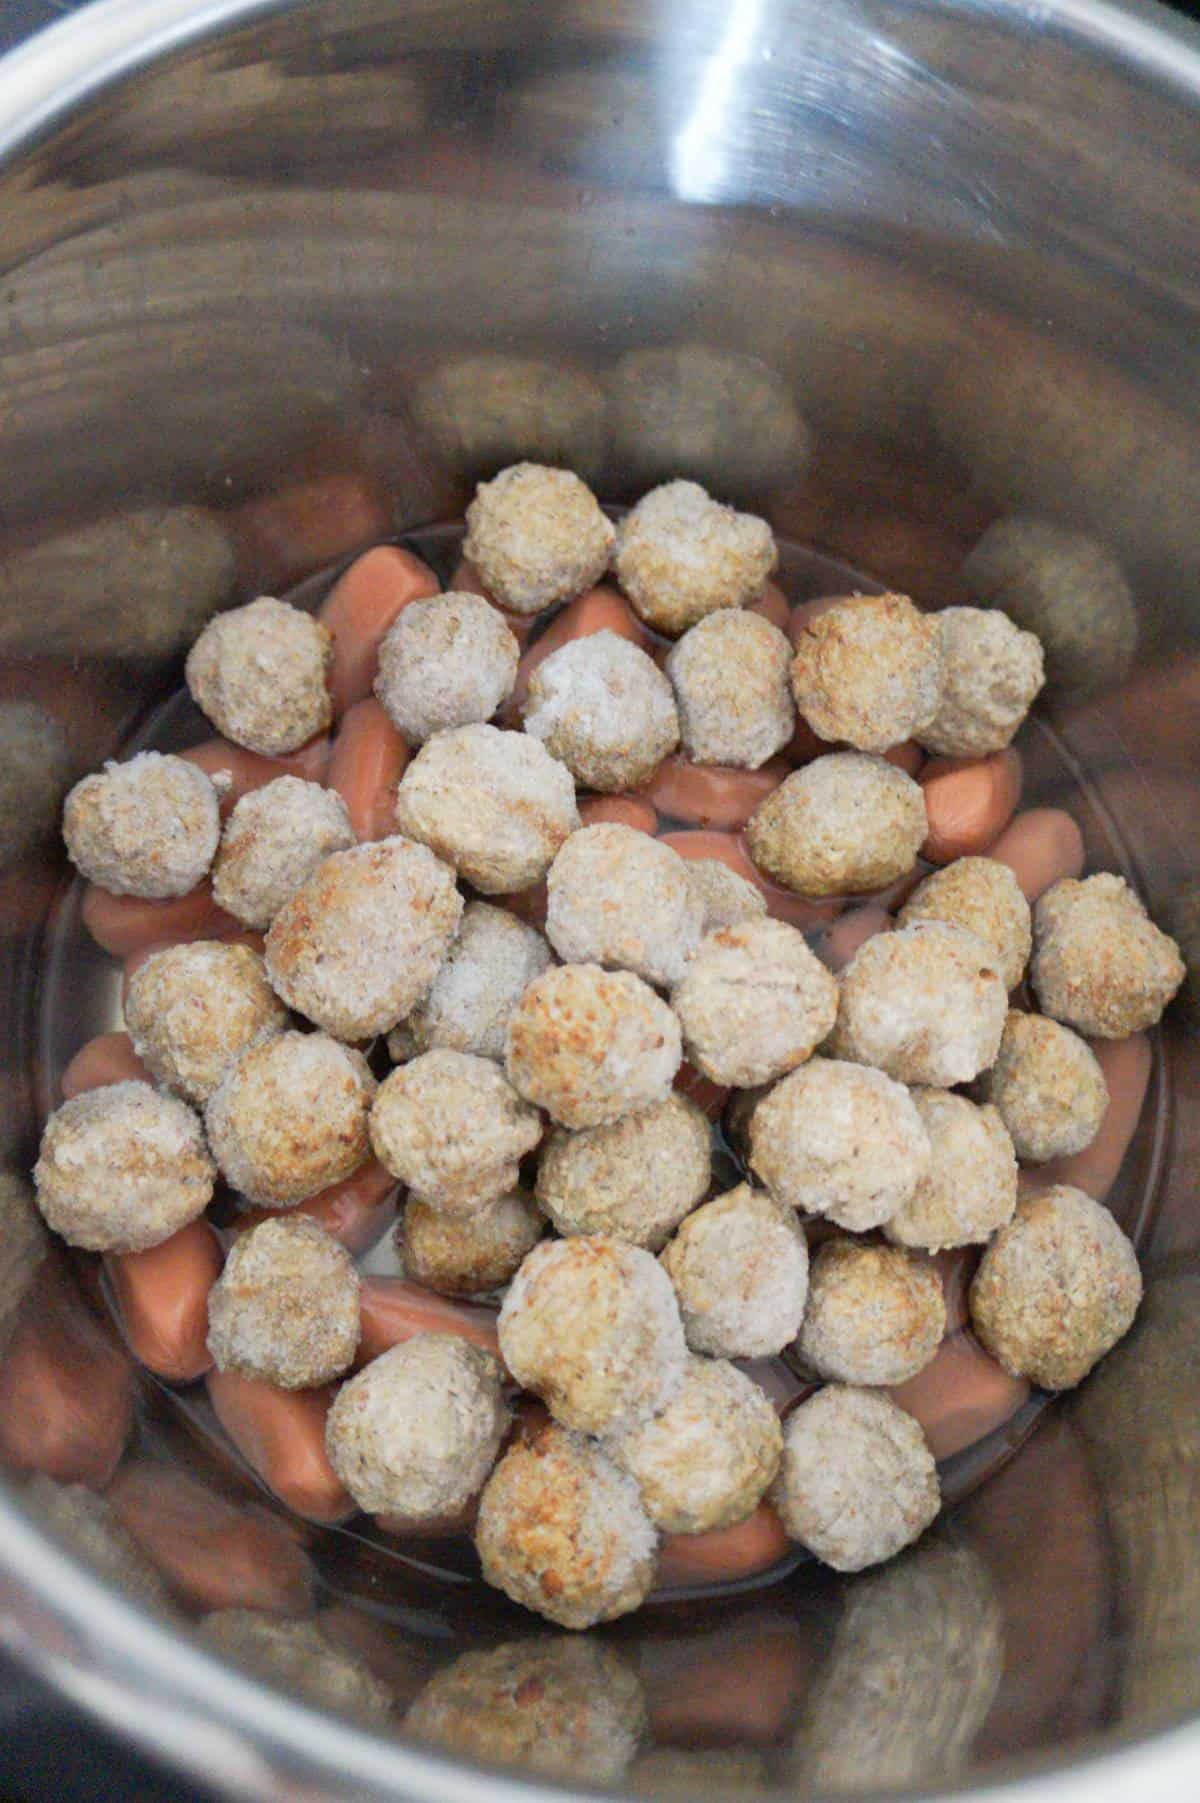 cocktail wieners and frozen meatballs in an Instant Pot